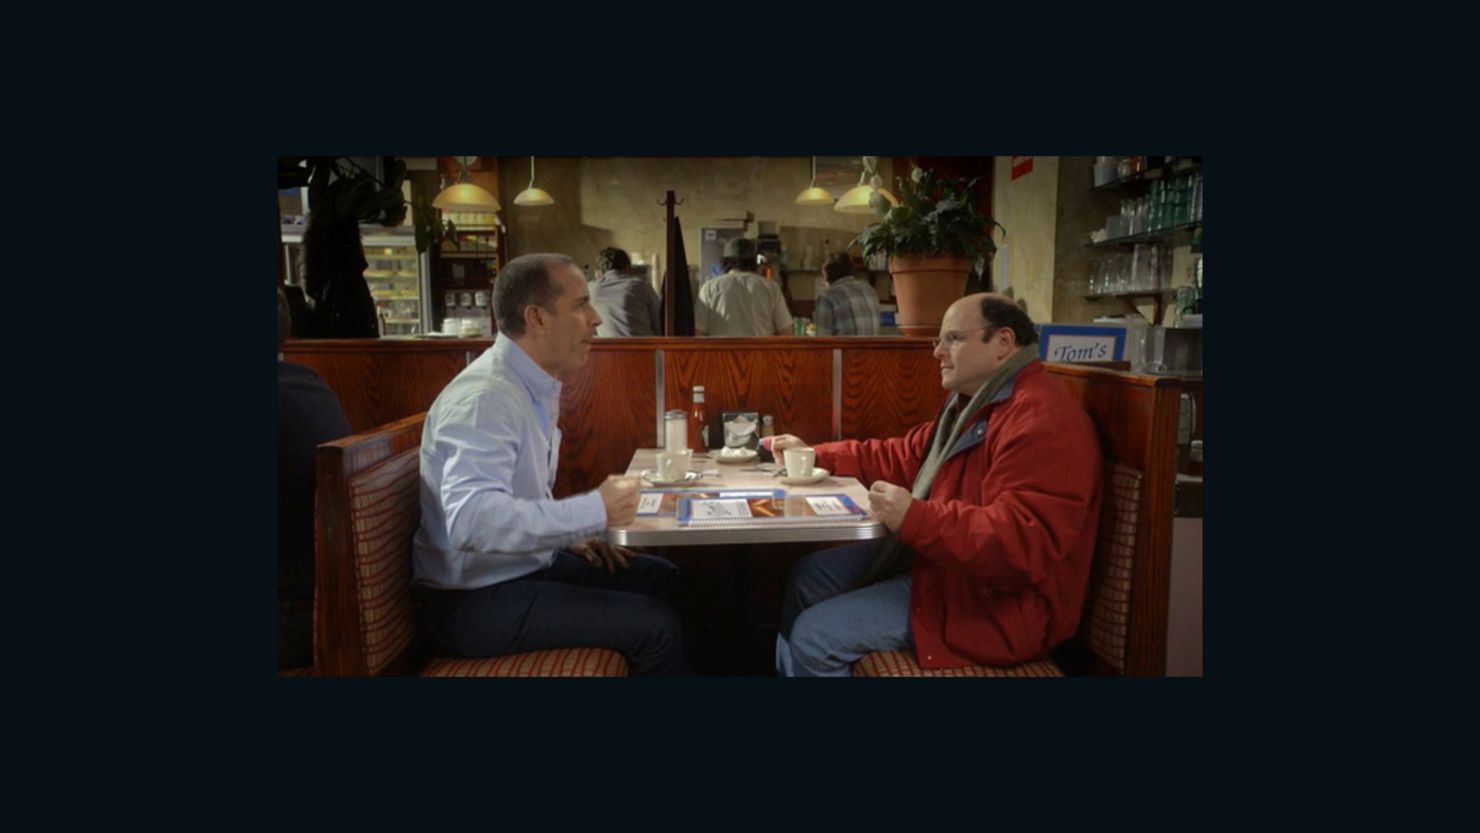 Jerry Seinfeld and Jason Alexander reunite for a commercial, of sorts, during the Super Bowl.